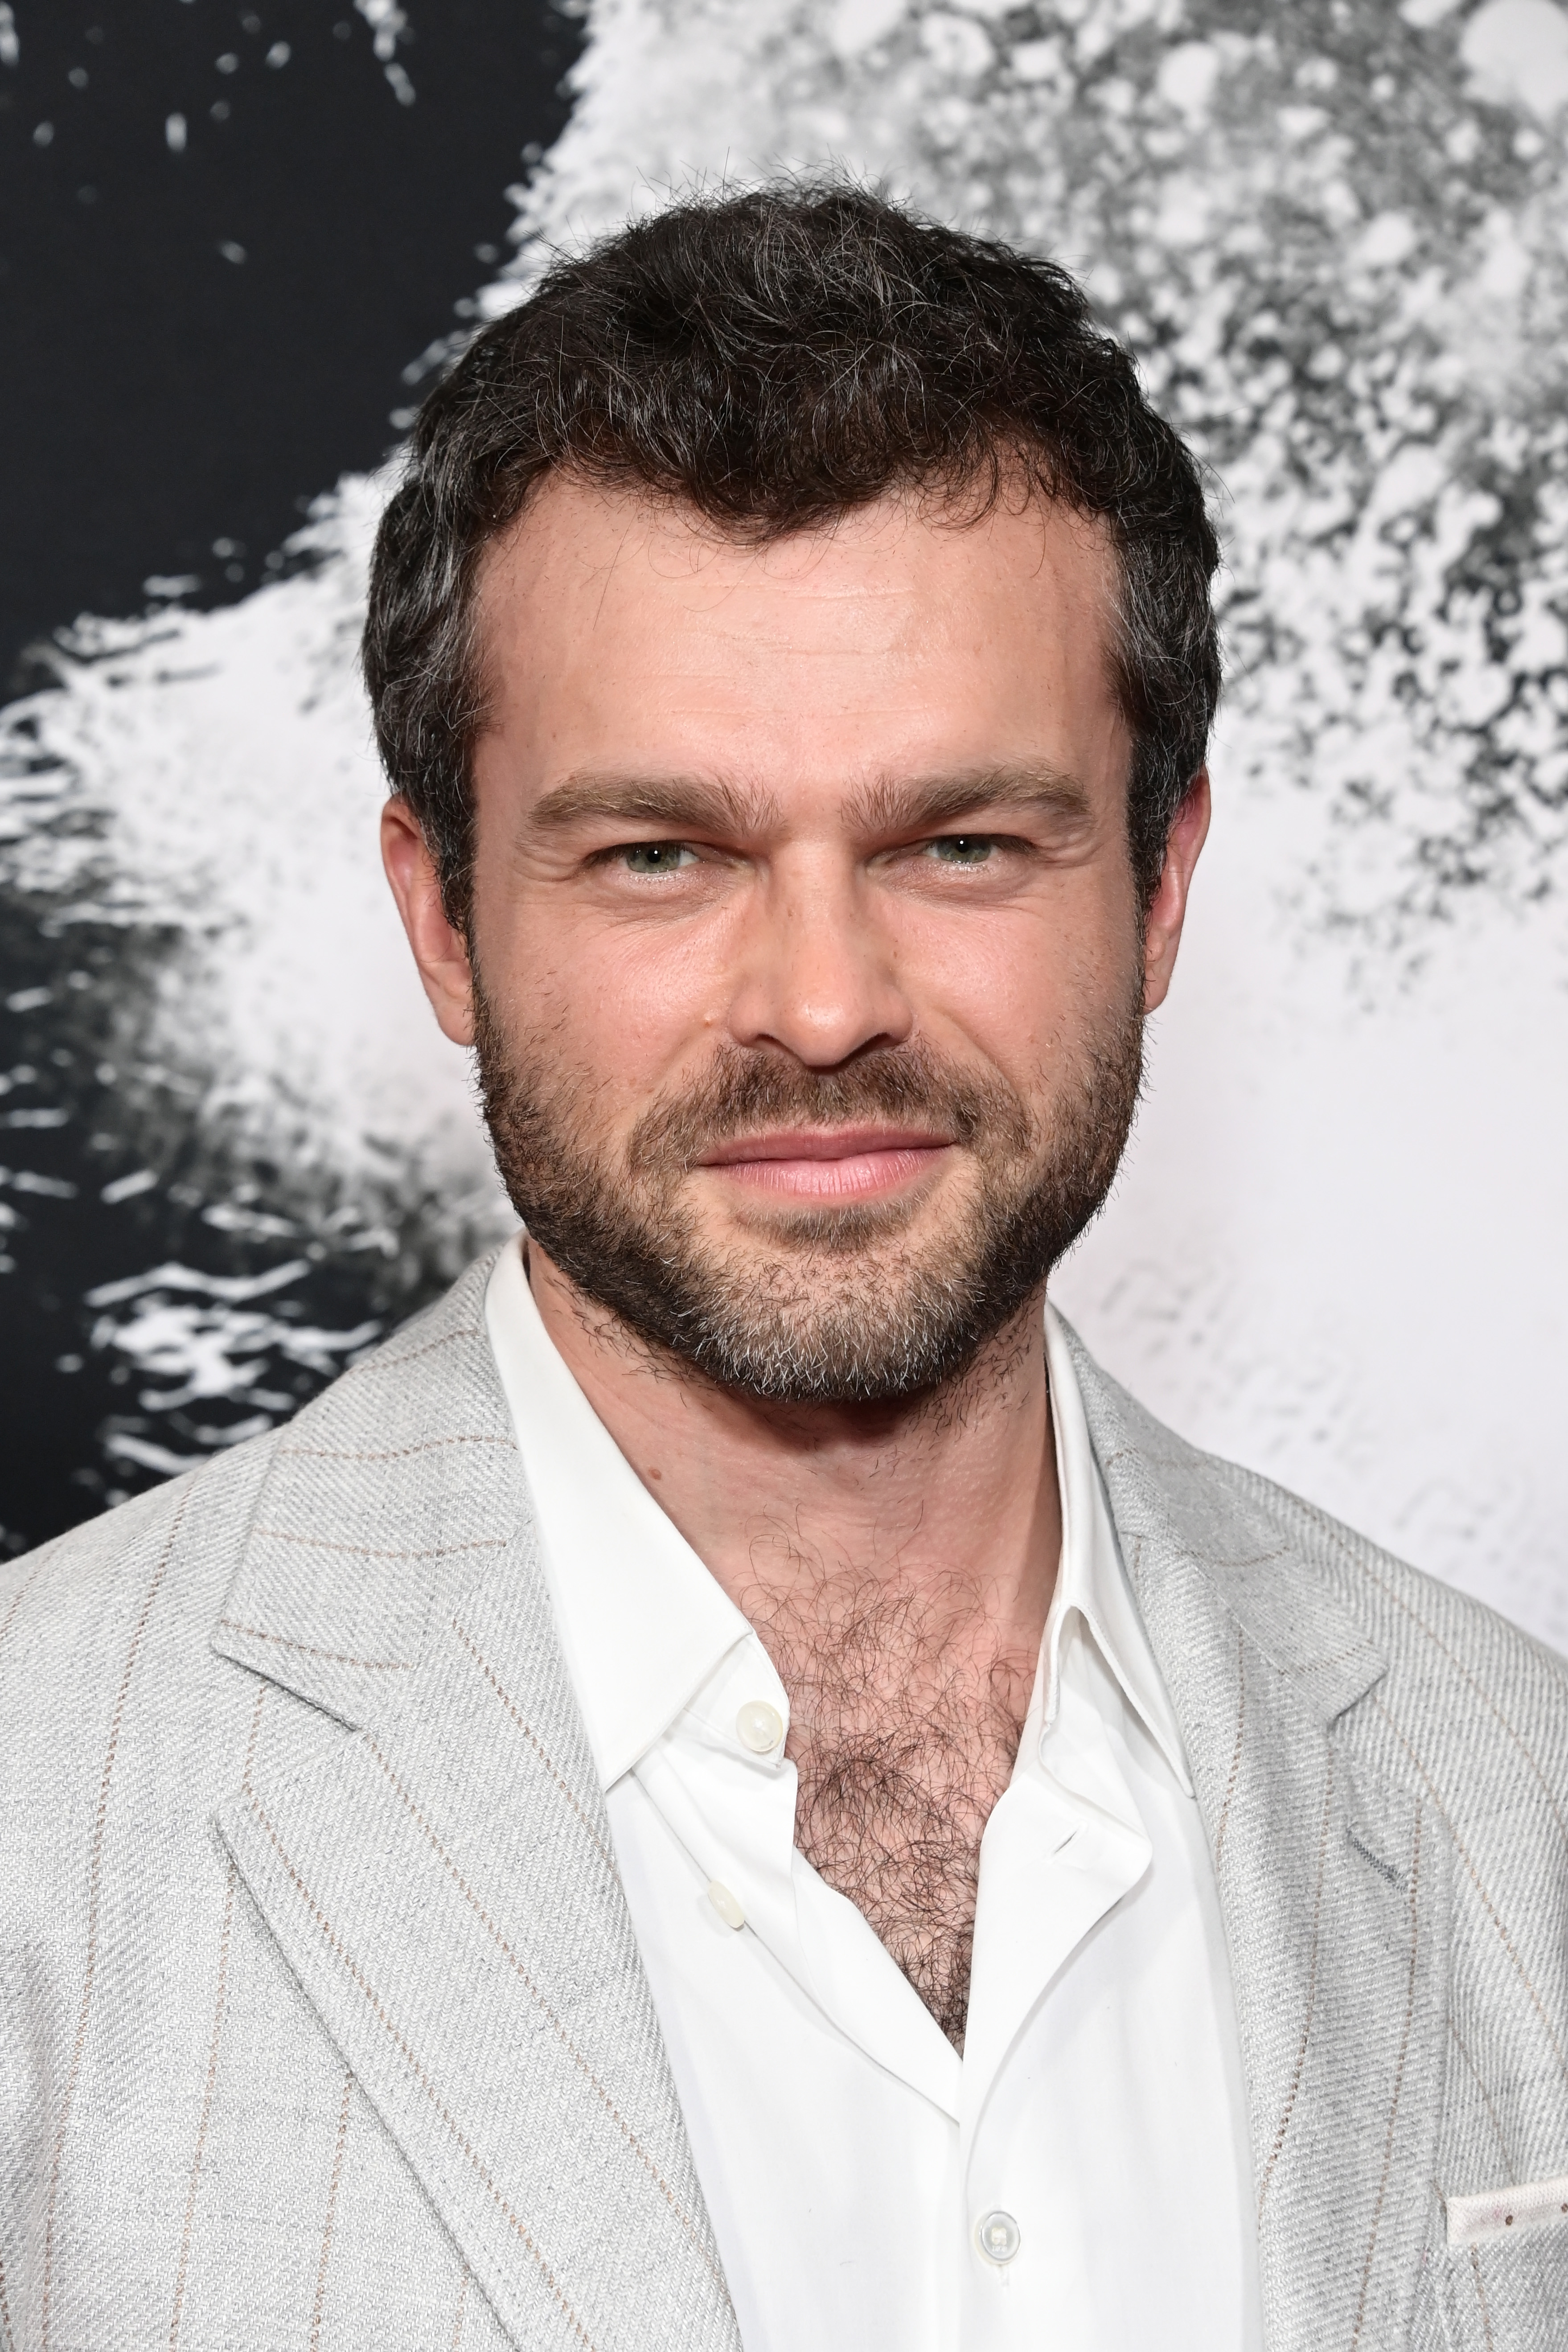 Alden Ehrenreich on the red carpet for Cocaine Bear